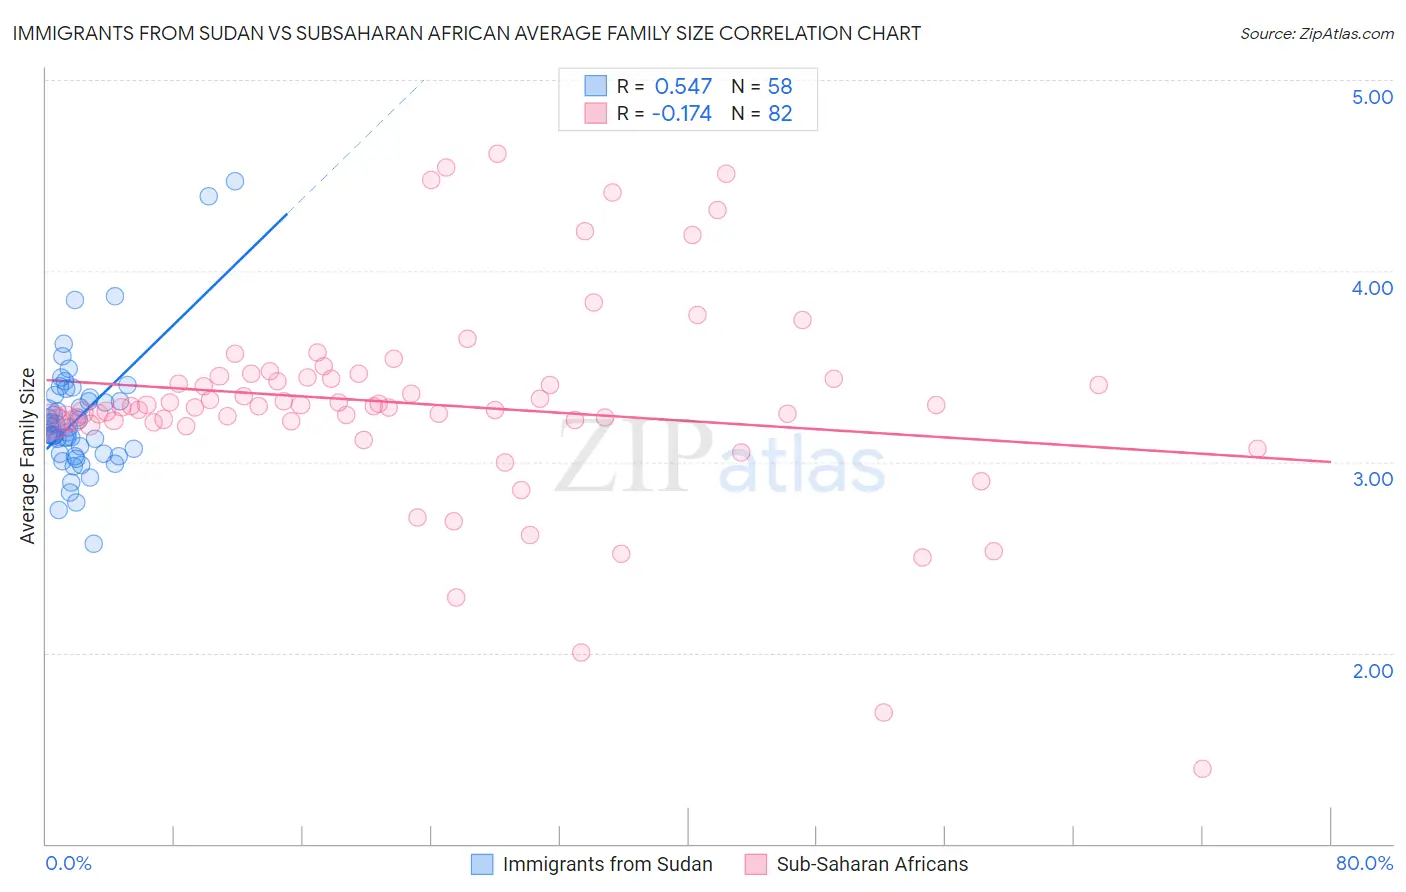 Immigrants from Sudan vs Subsaharan African Average Family Size